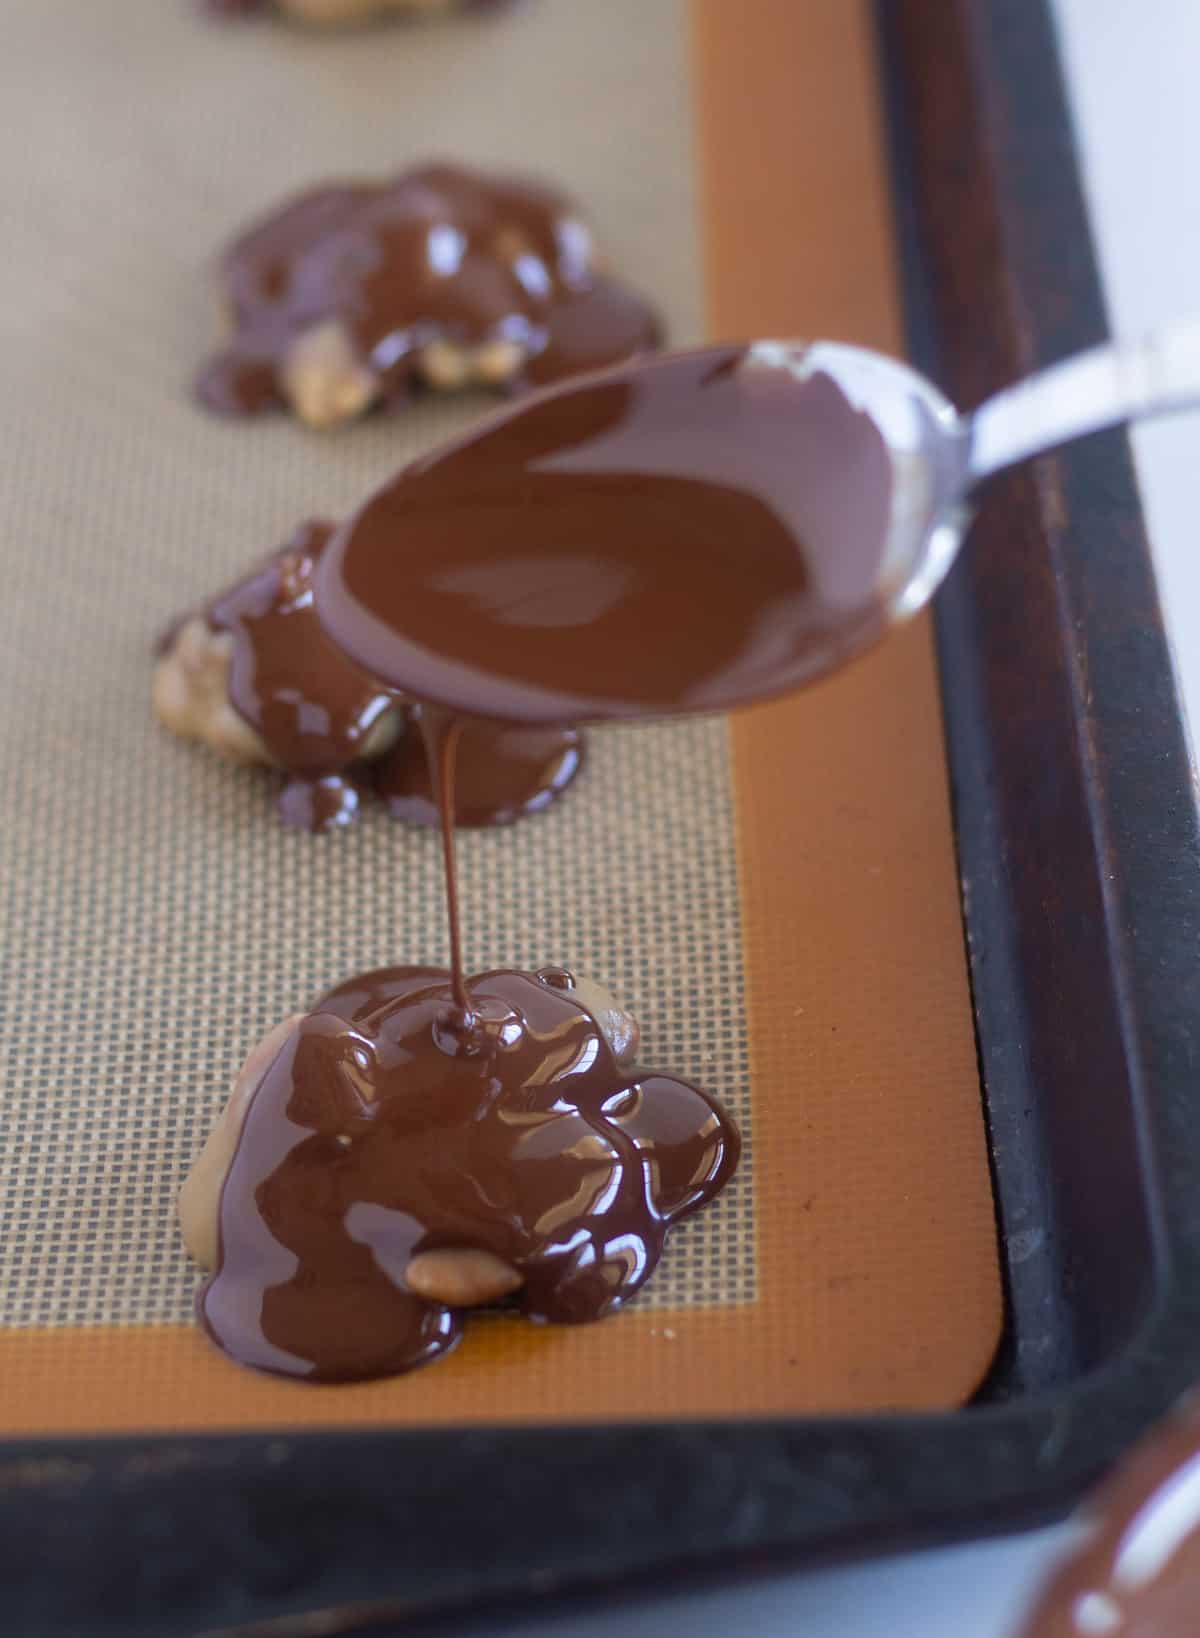 drizzling melted chocolate onto the pecan/caramel mixture